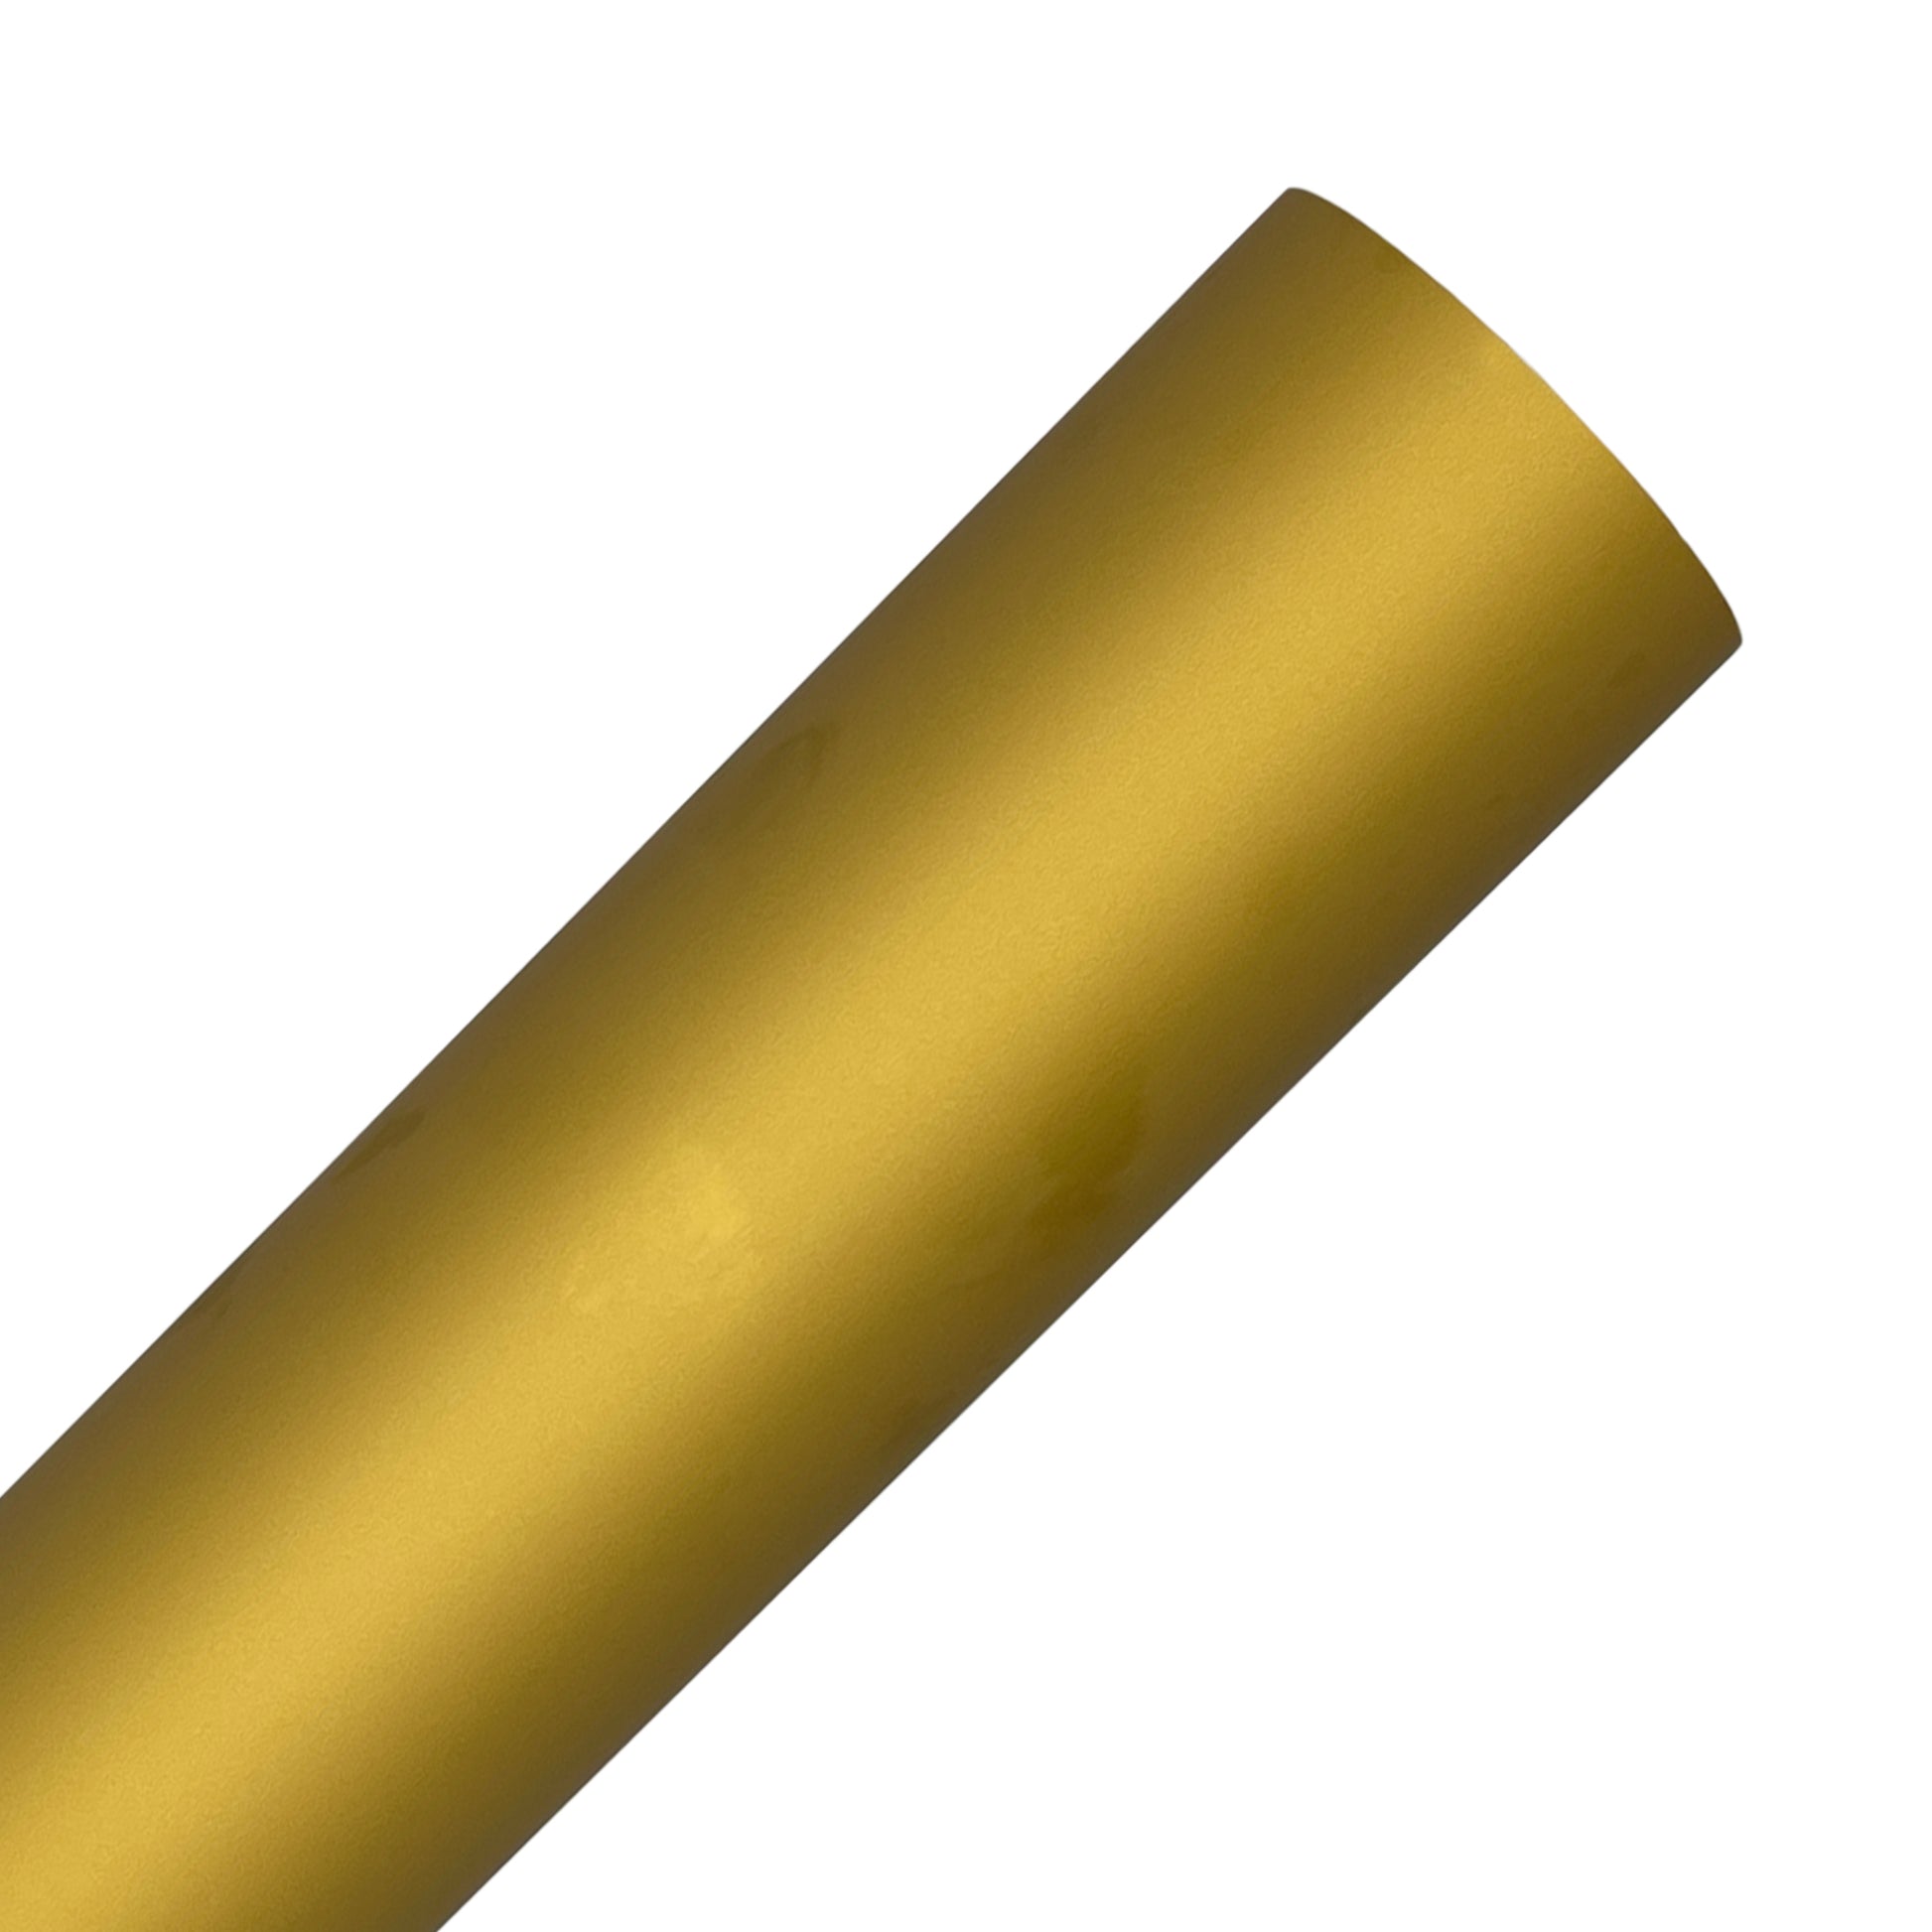 Gold Adhesive Vinyl Rolls By Craftables – shopcraftables